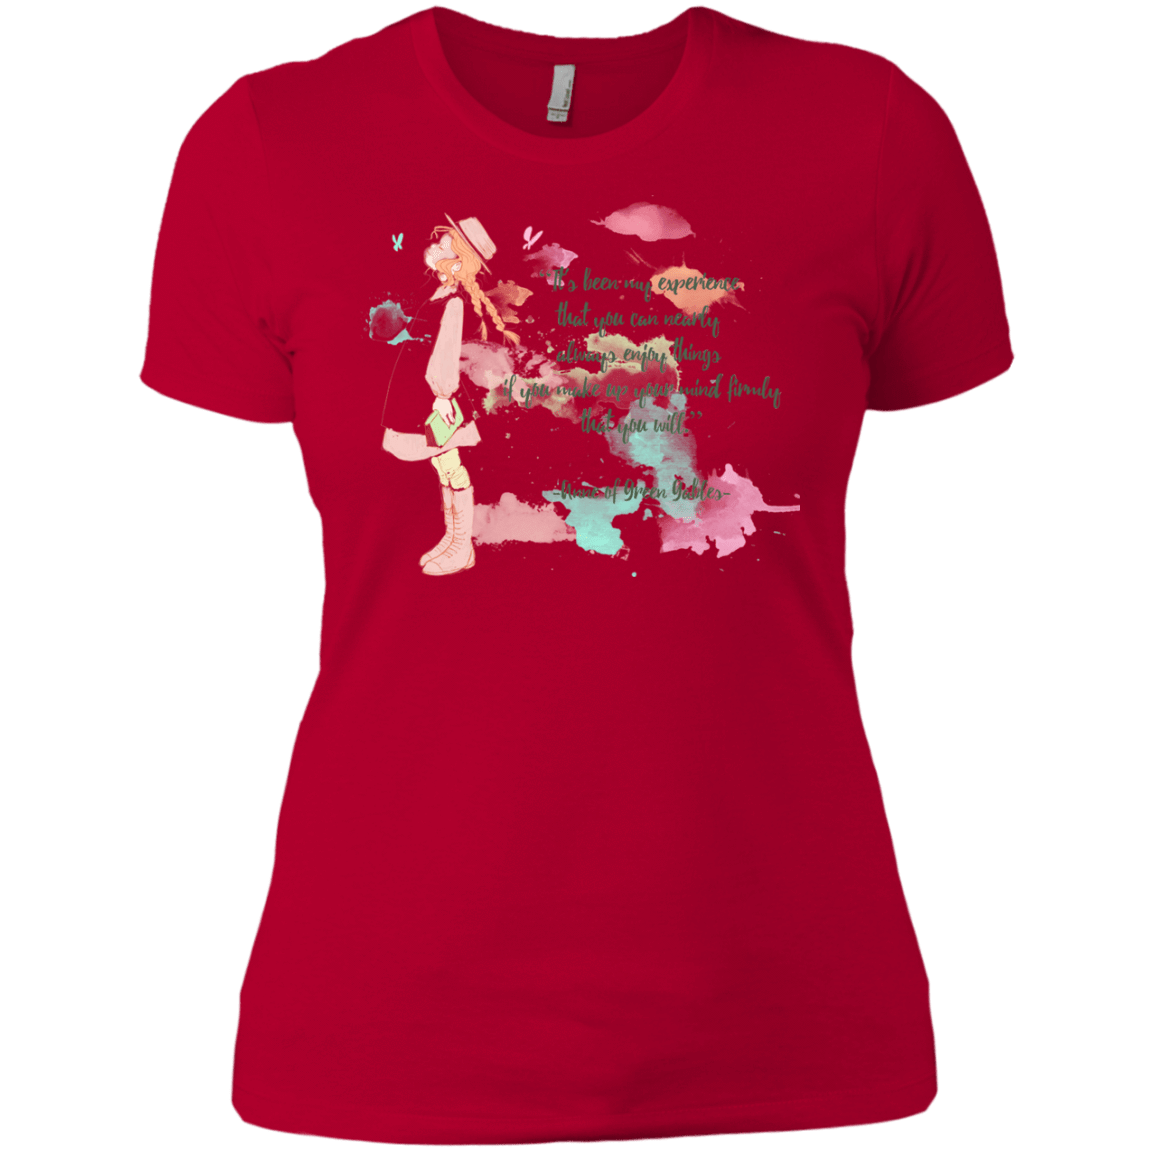 T-Shirts Red / X-Small Anne of Green Gables Women's Premium T-Shirt